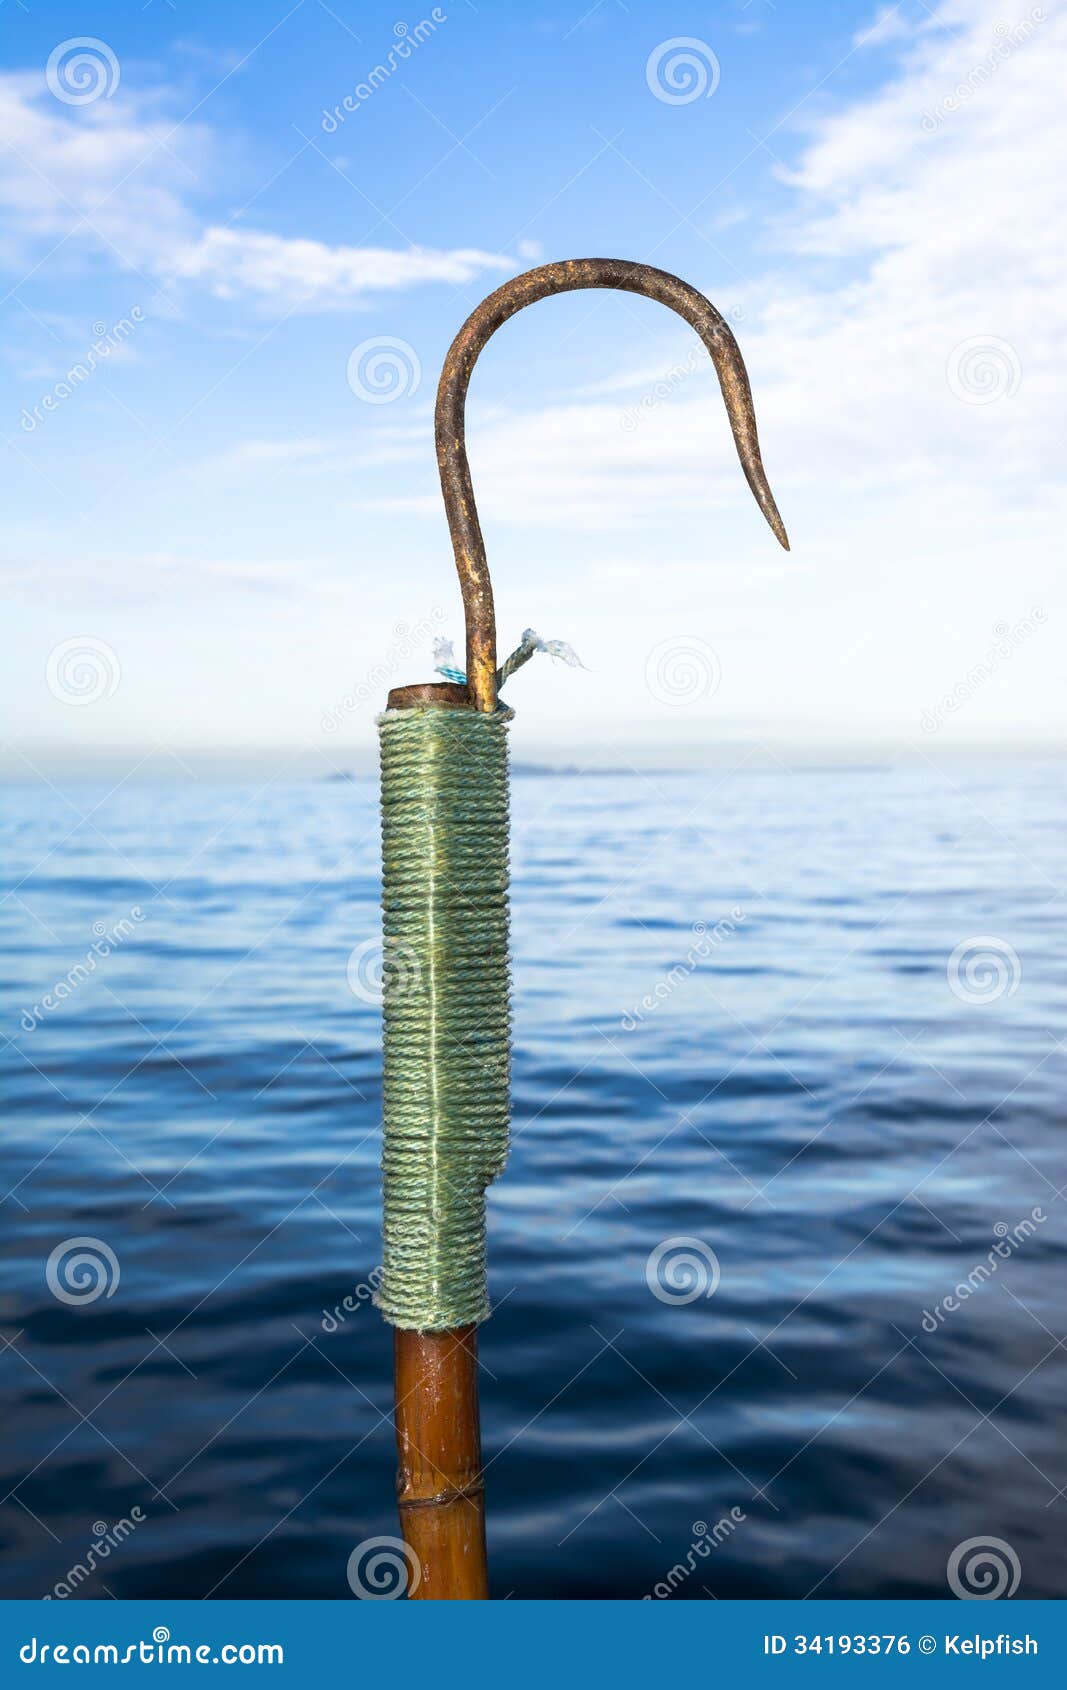 Fishing gaff stock photo. Image of outdoors, saltwater - 34193376